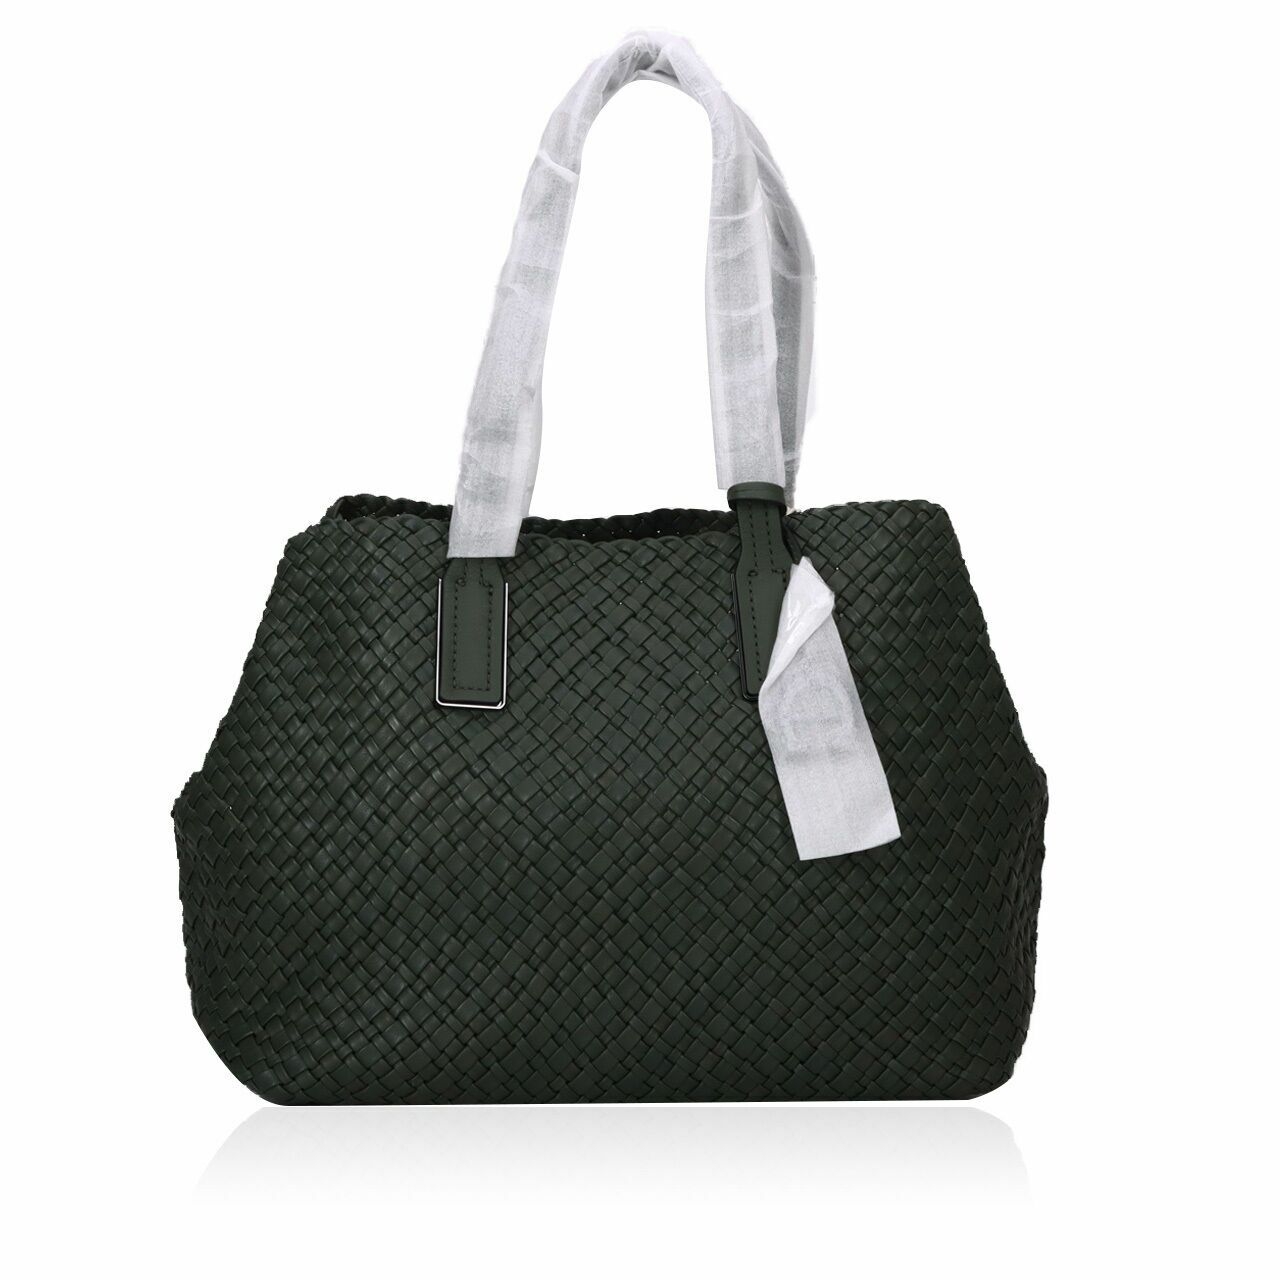 Etienne Aigner Irene Woven Leather Tote Pine Green